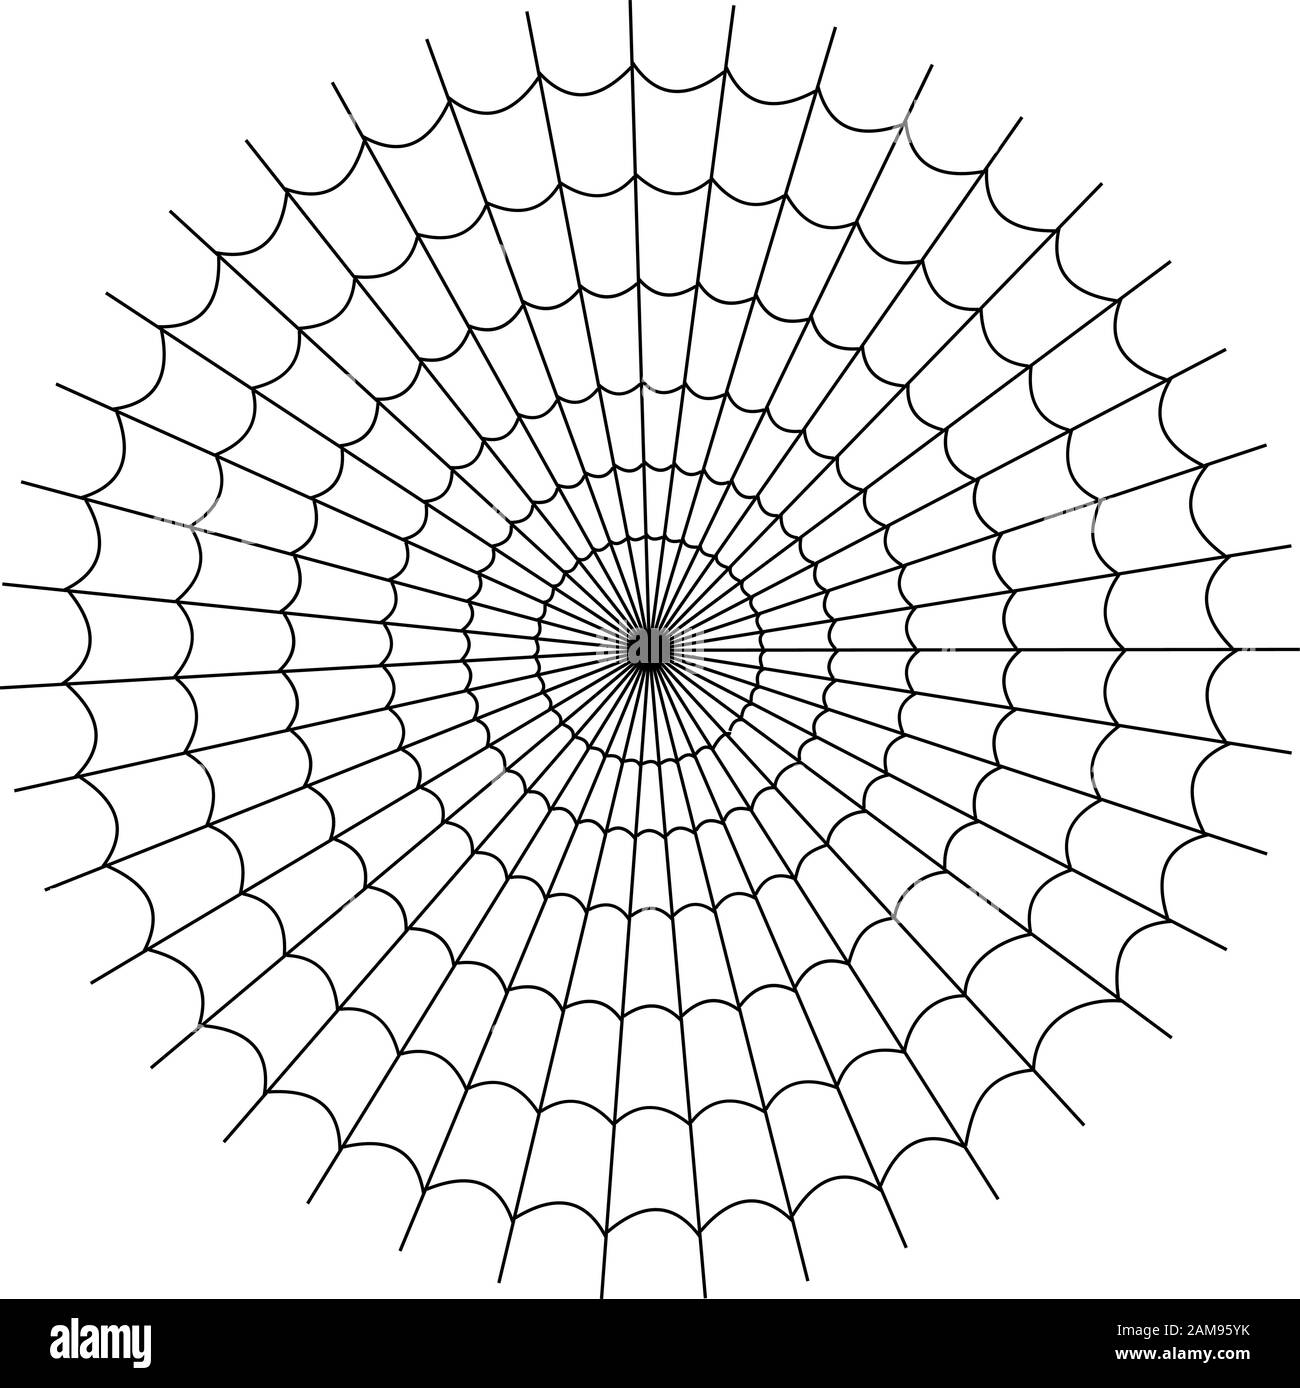 Black and white vector cartoon spider web. Simple image with cobweb for halloween party. Stock Vector